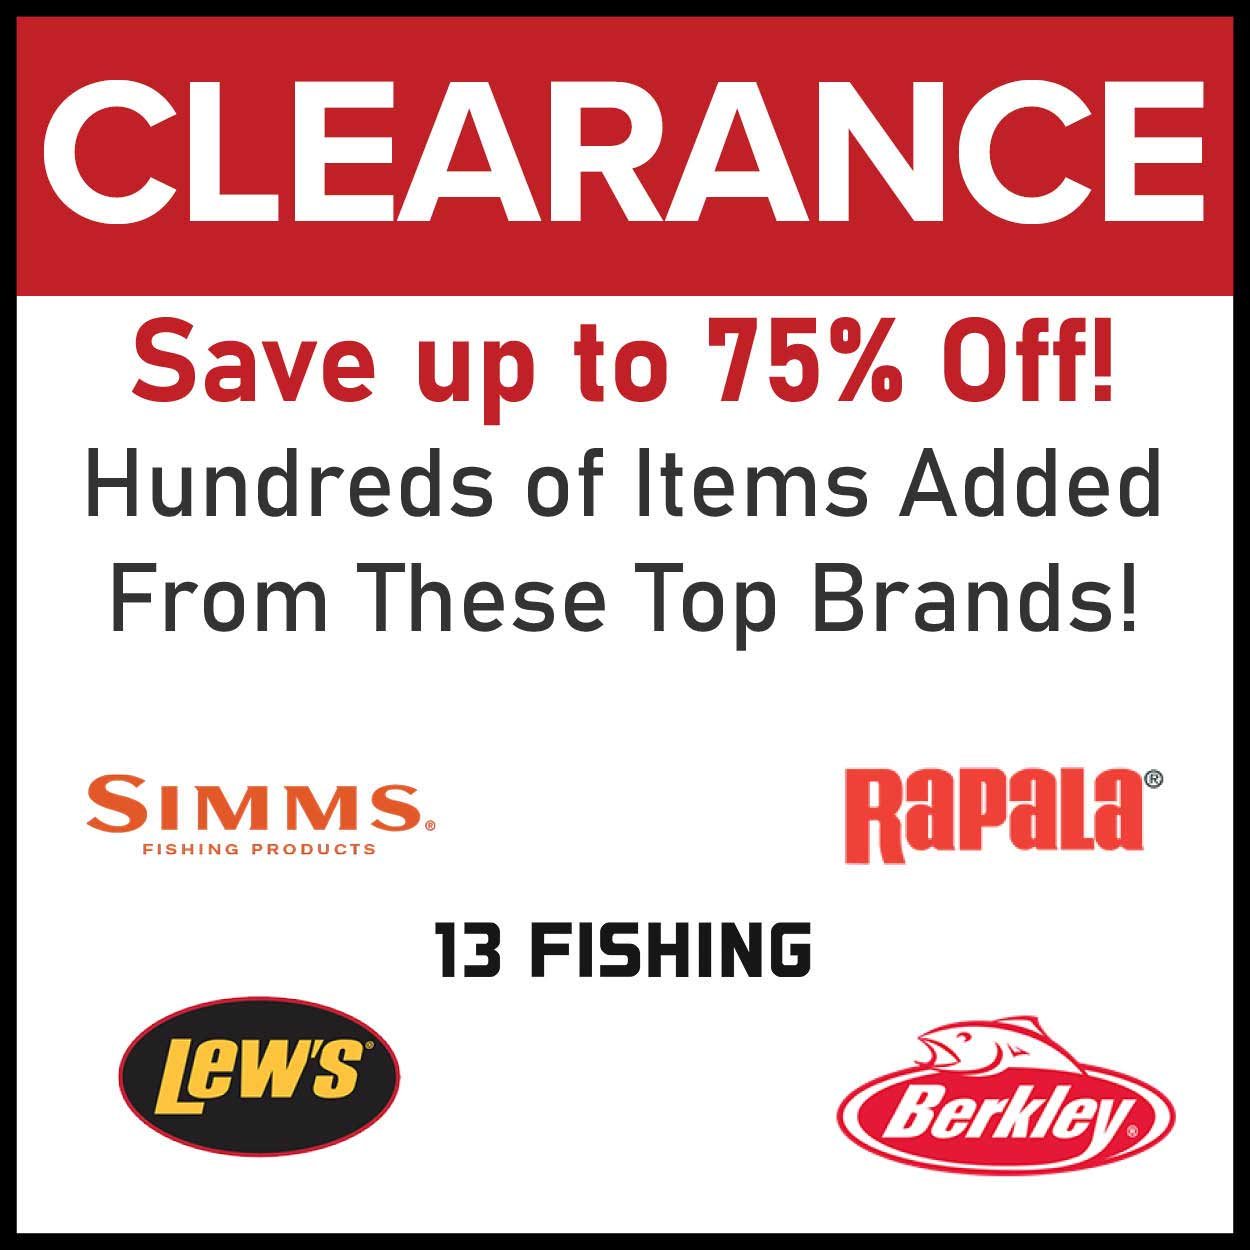 Save up to 75% off on Clearance Hundreds of Items Added!